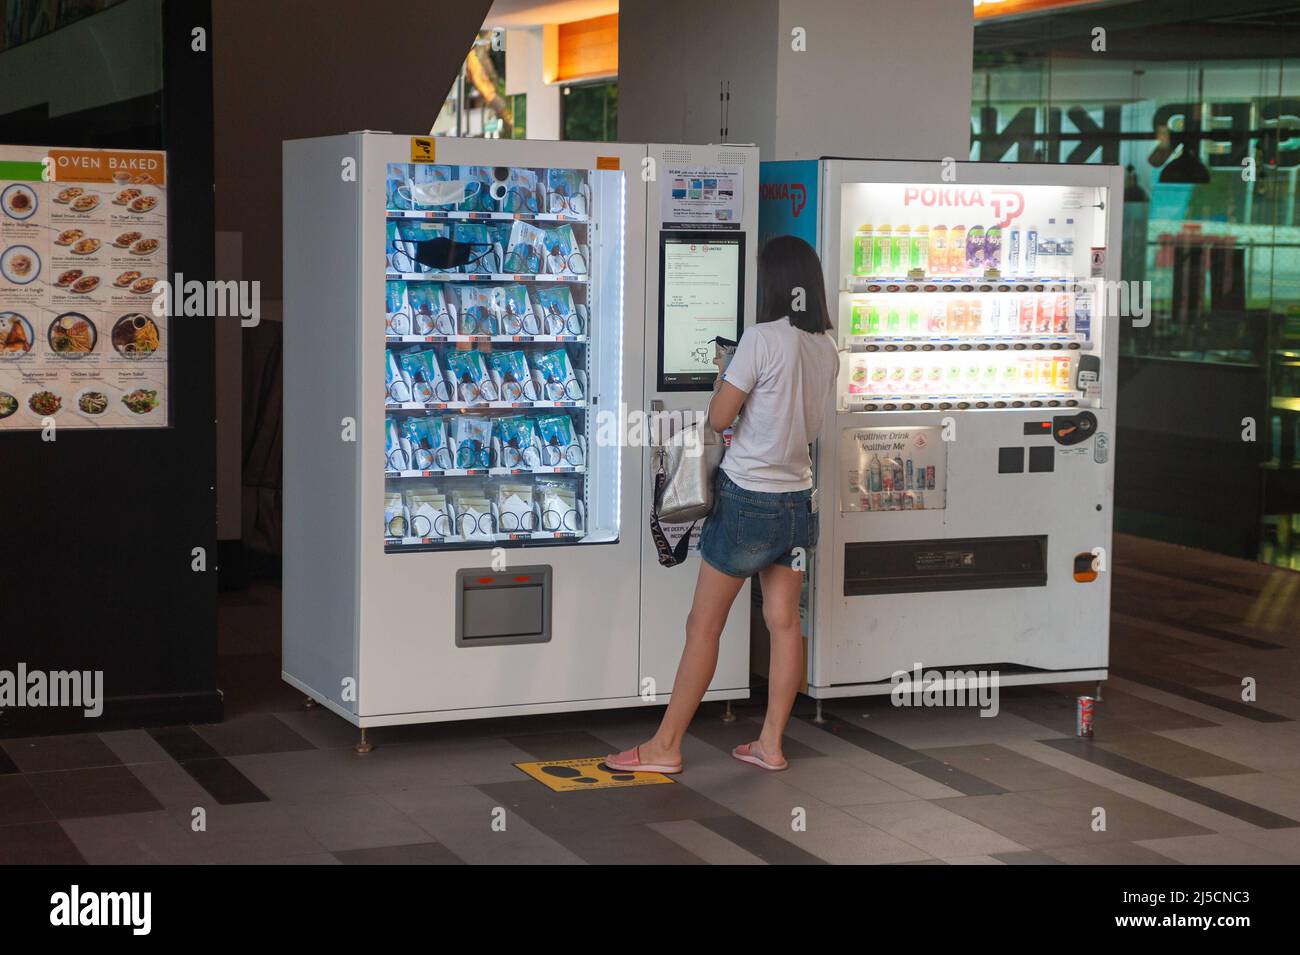 06/10/2020, Singapore, Republic of Singapore, Asia - A woman obtains a reusable mouthguard to prevent the spread of Covid-19 (coronavirus) from a government-issued vending machine at Kebun Baru community center where she scans her ID card. [automated translation] Stock Photo